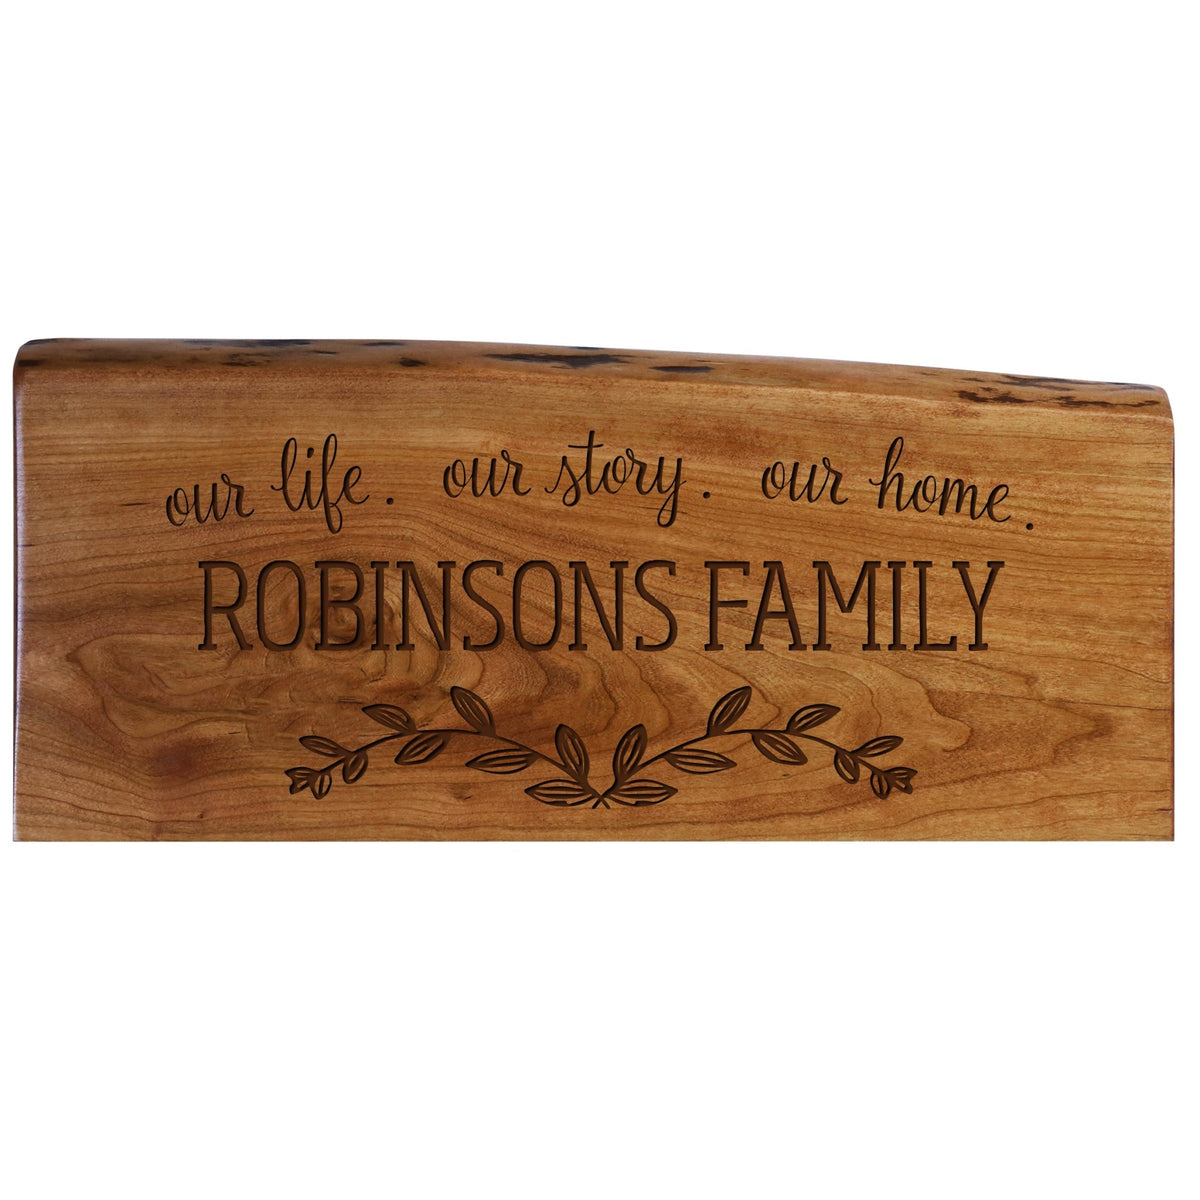 Personalized Home Decor Family Established Plaque - Our Lives Our Story - LifeSong Milestones